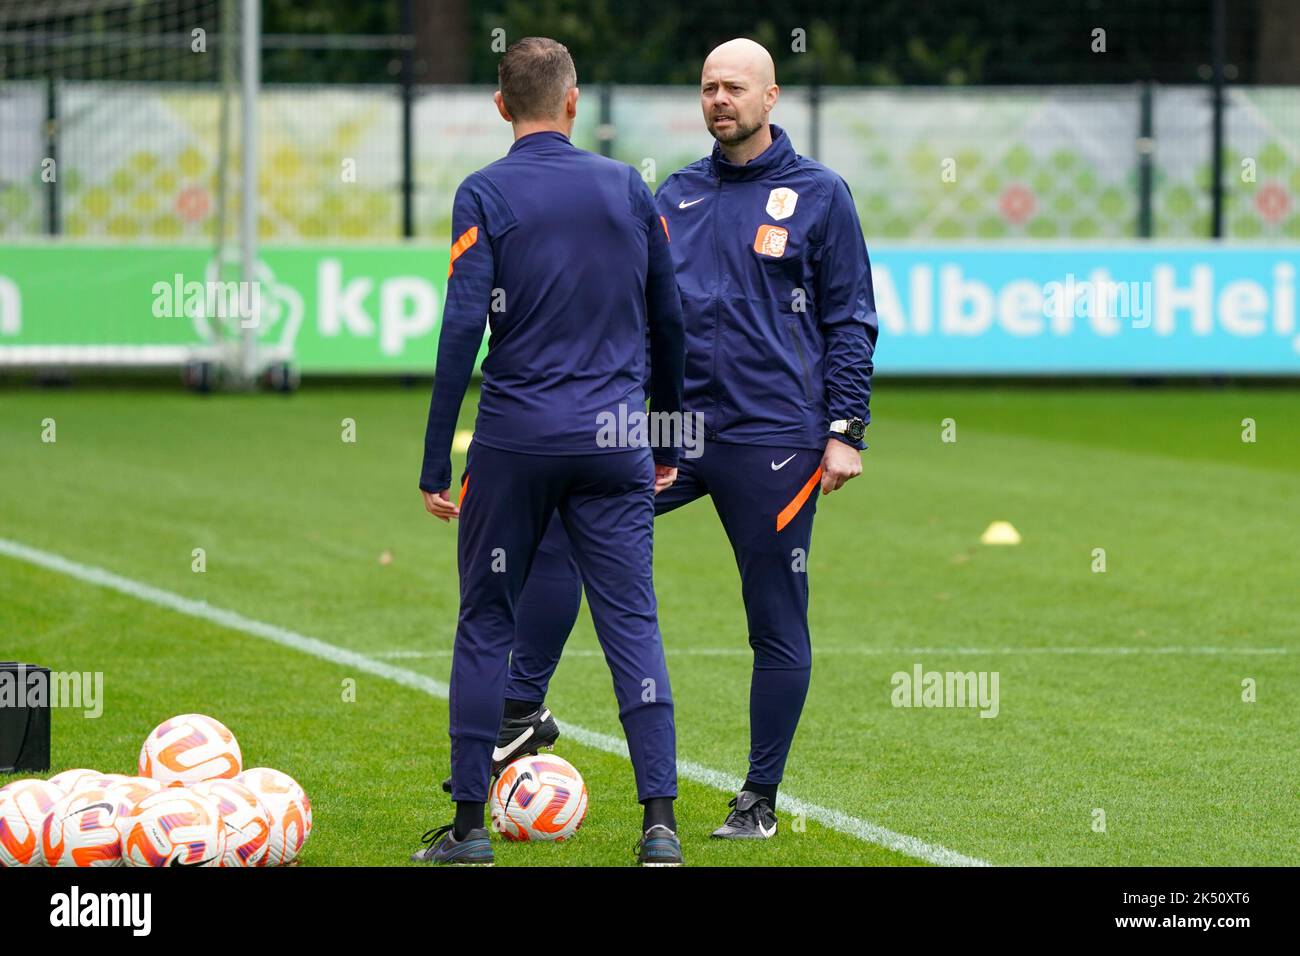 ZEIST, NETHERLANDS - OCTOBER 5: Erskine Schoenmakers of the Netherlands during a Training Session of the Netherlands Women’s Football Team at the KNVB Campus on October 5, 2022 in Zeist, Netherlands (Photo by Jeroen Meuwsen/Orange Pictures) Stock Photo